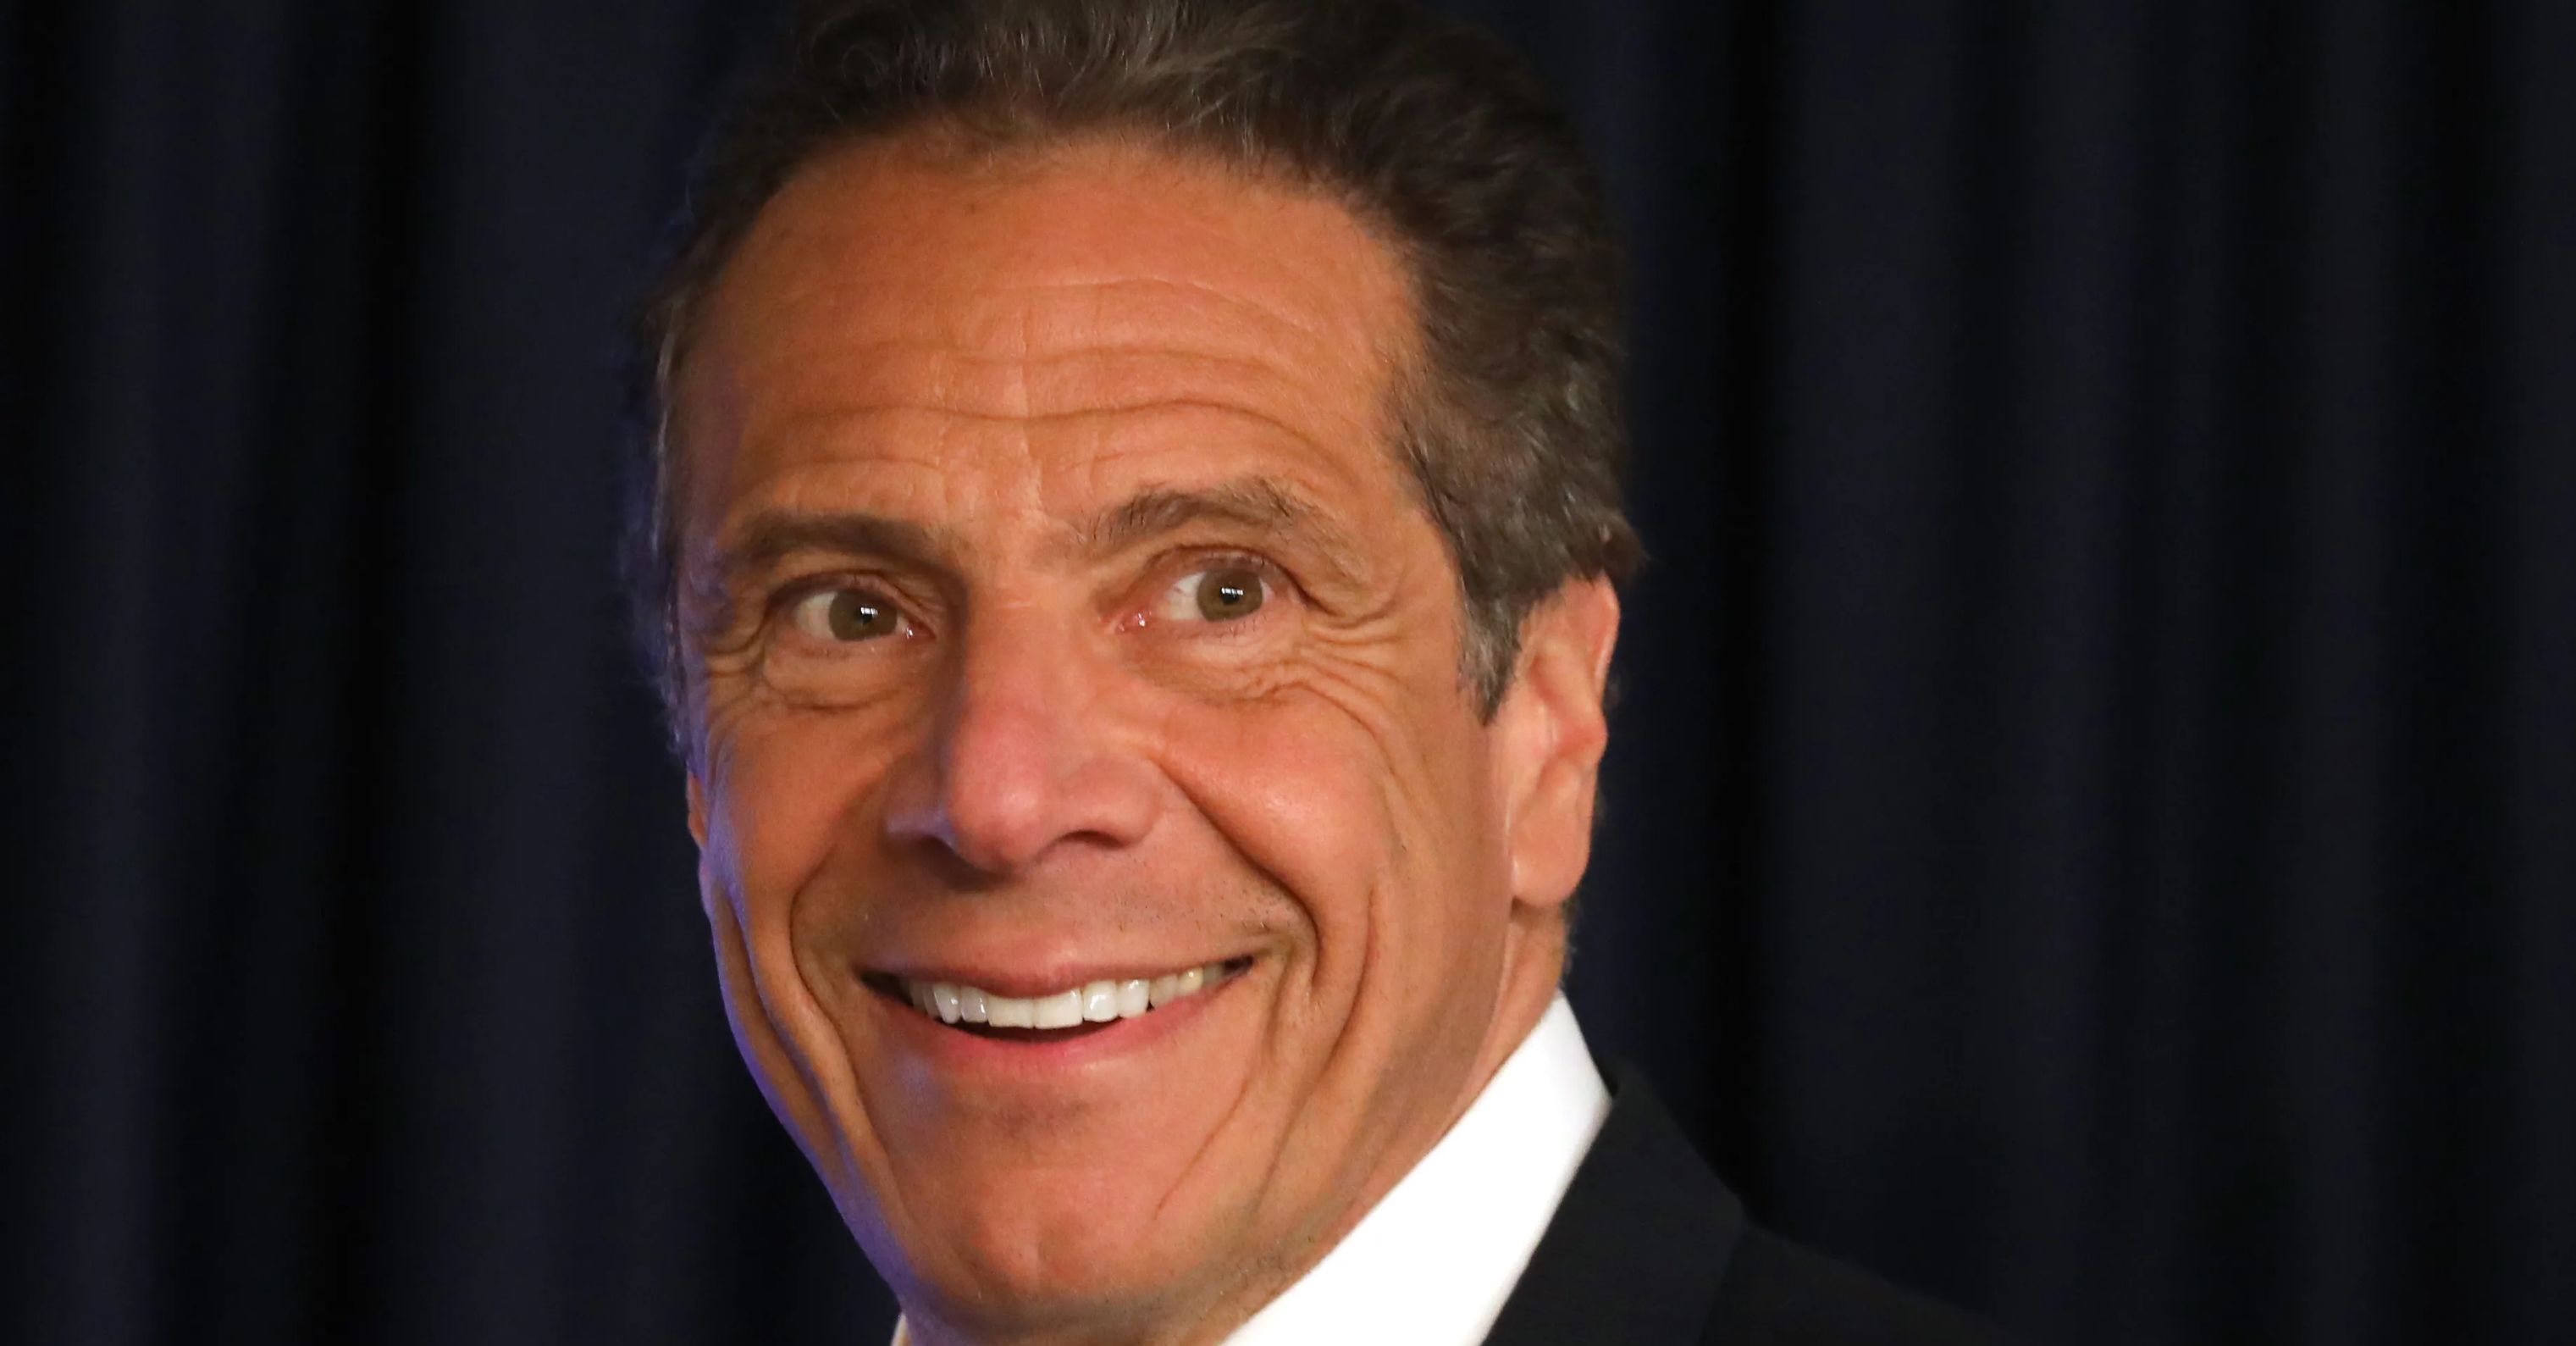 New York Gov. Andrew Cuomo holds a news conference.